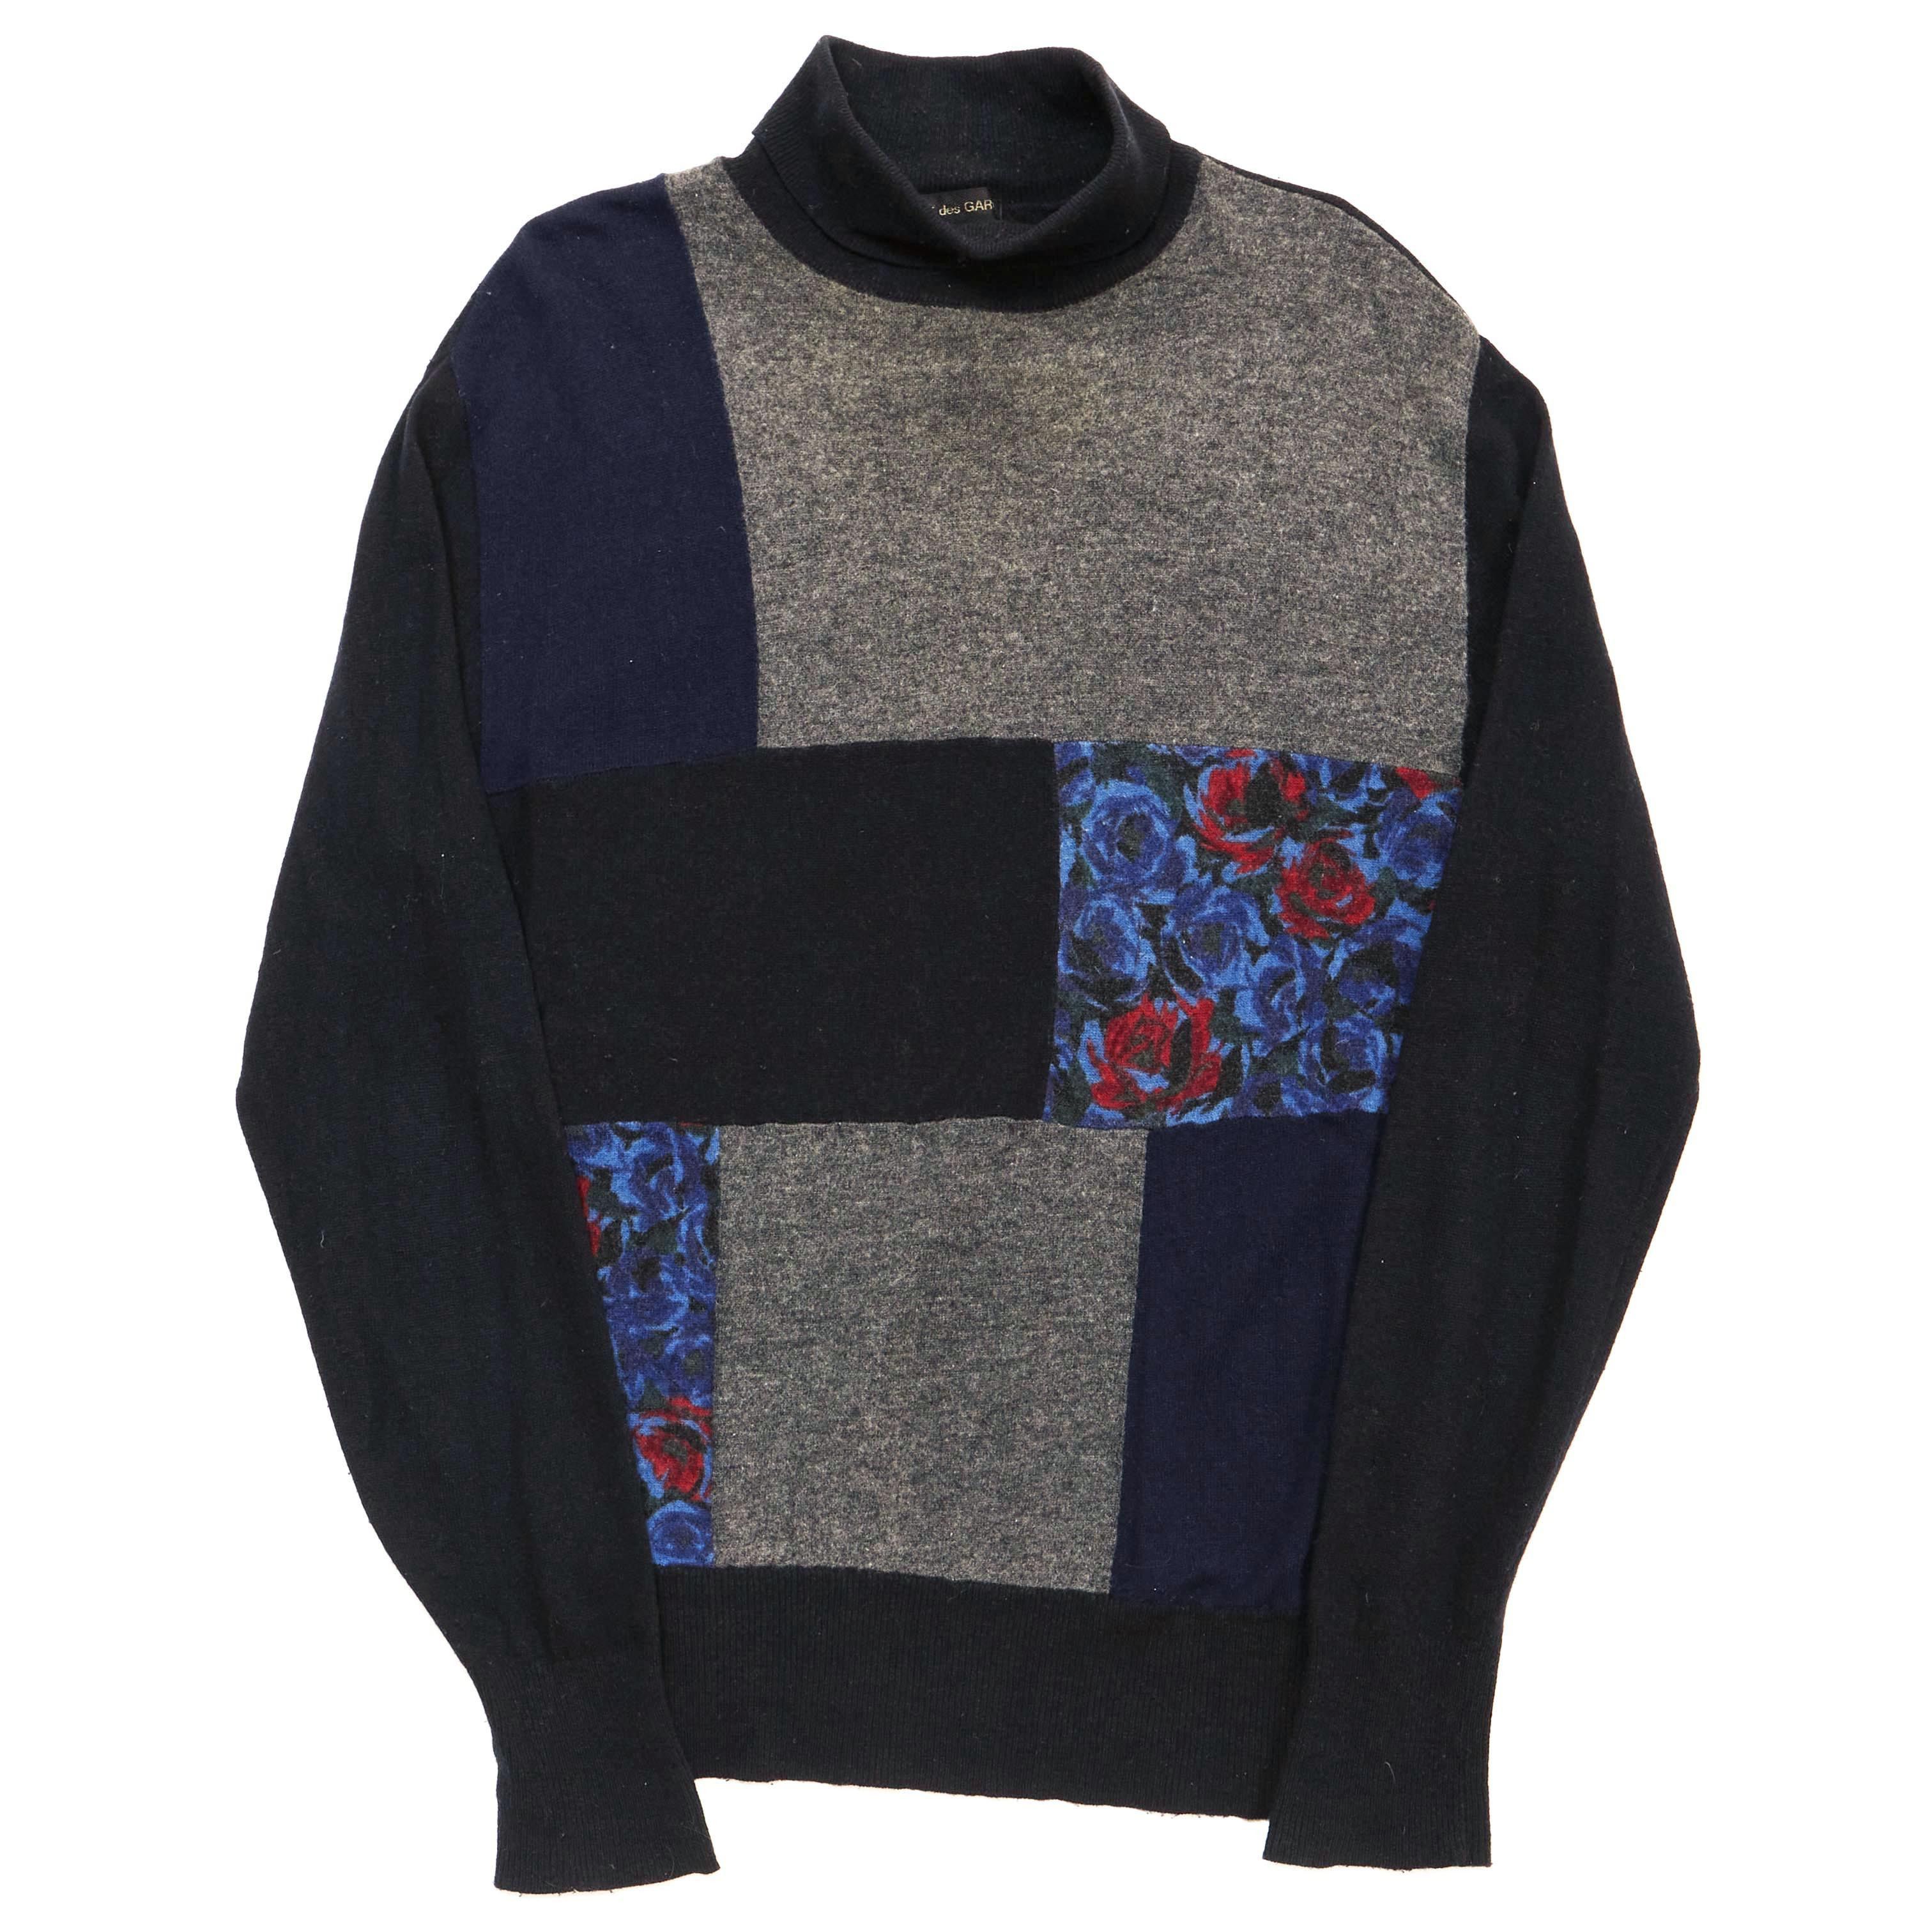 AW88 Floral-Print Patchwork Turtleneck Sweater - 1